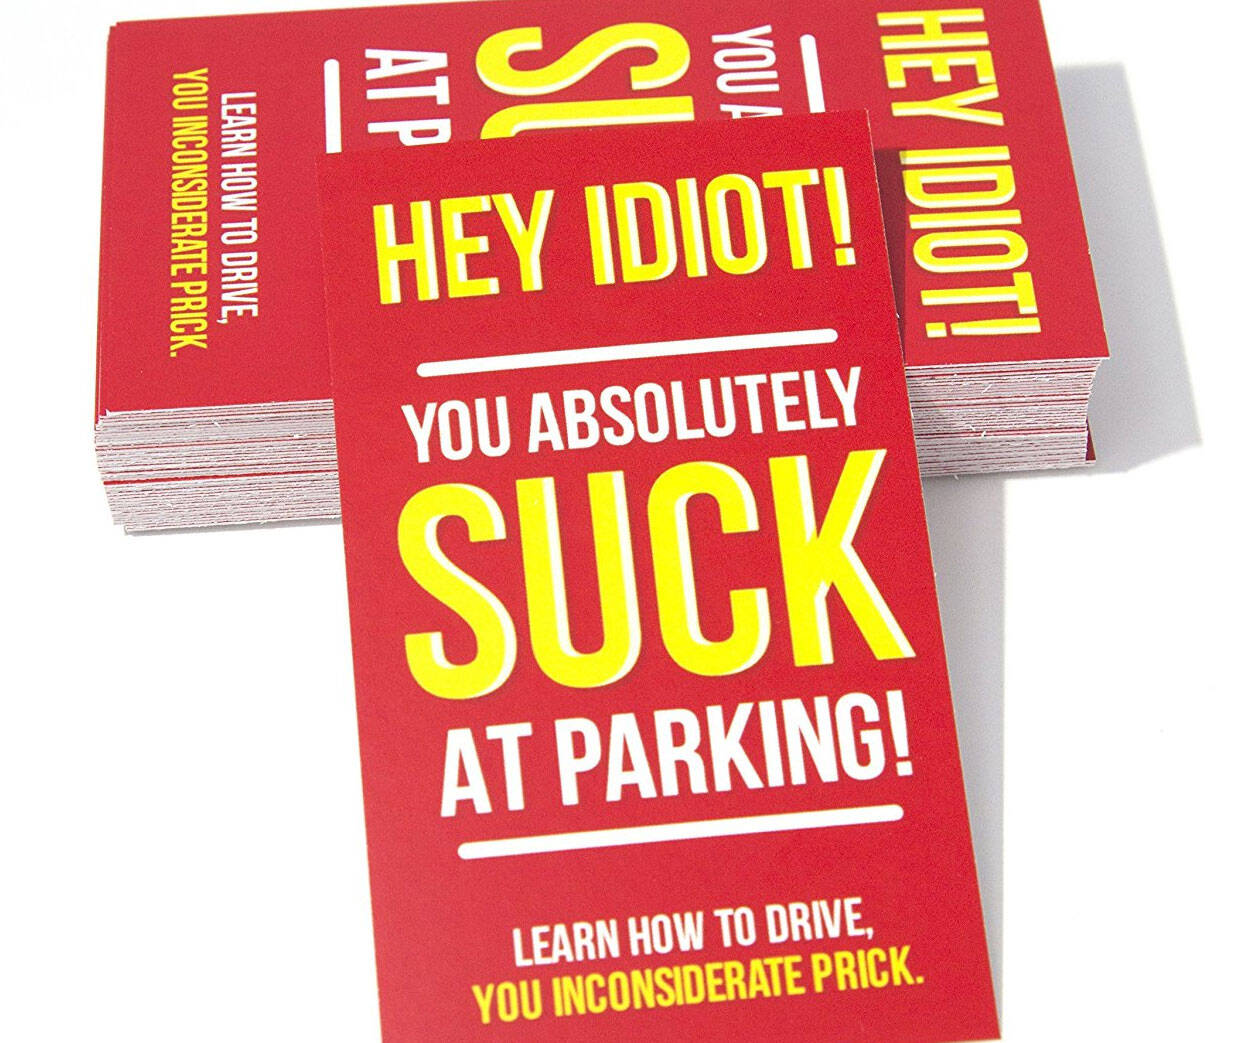 You Suck At Parking Cards - //coolthings.us